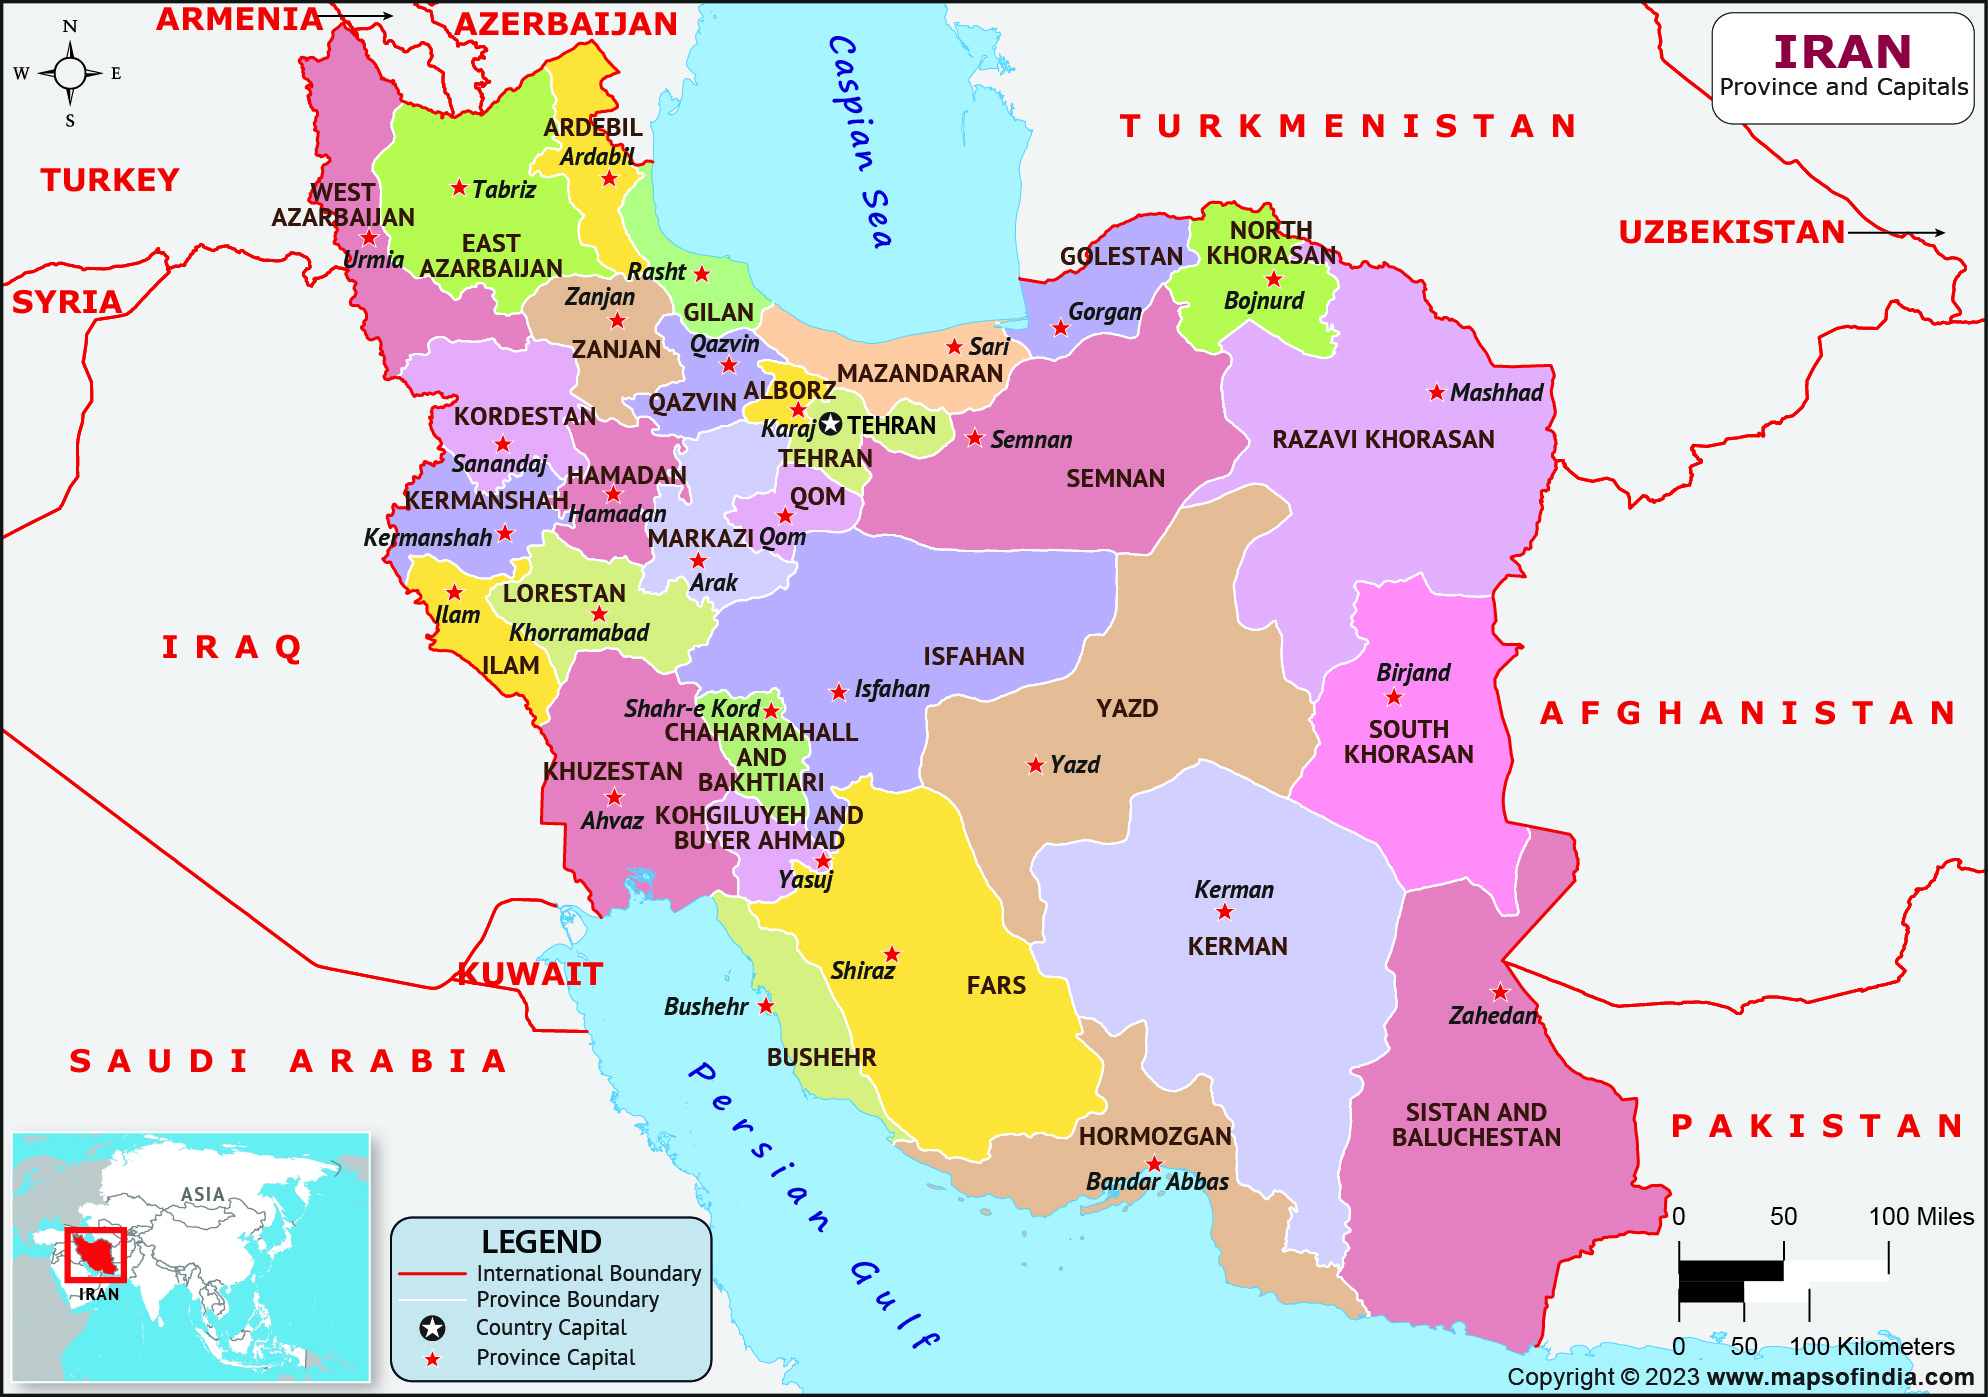 Iran Provinces and Capitals List and Map | List of Provinces and ...